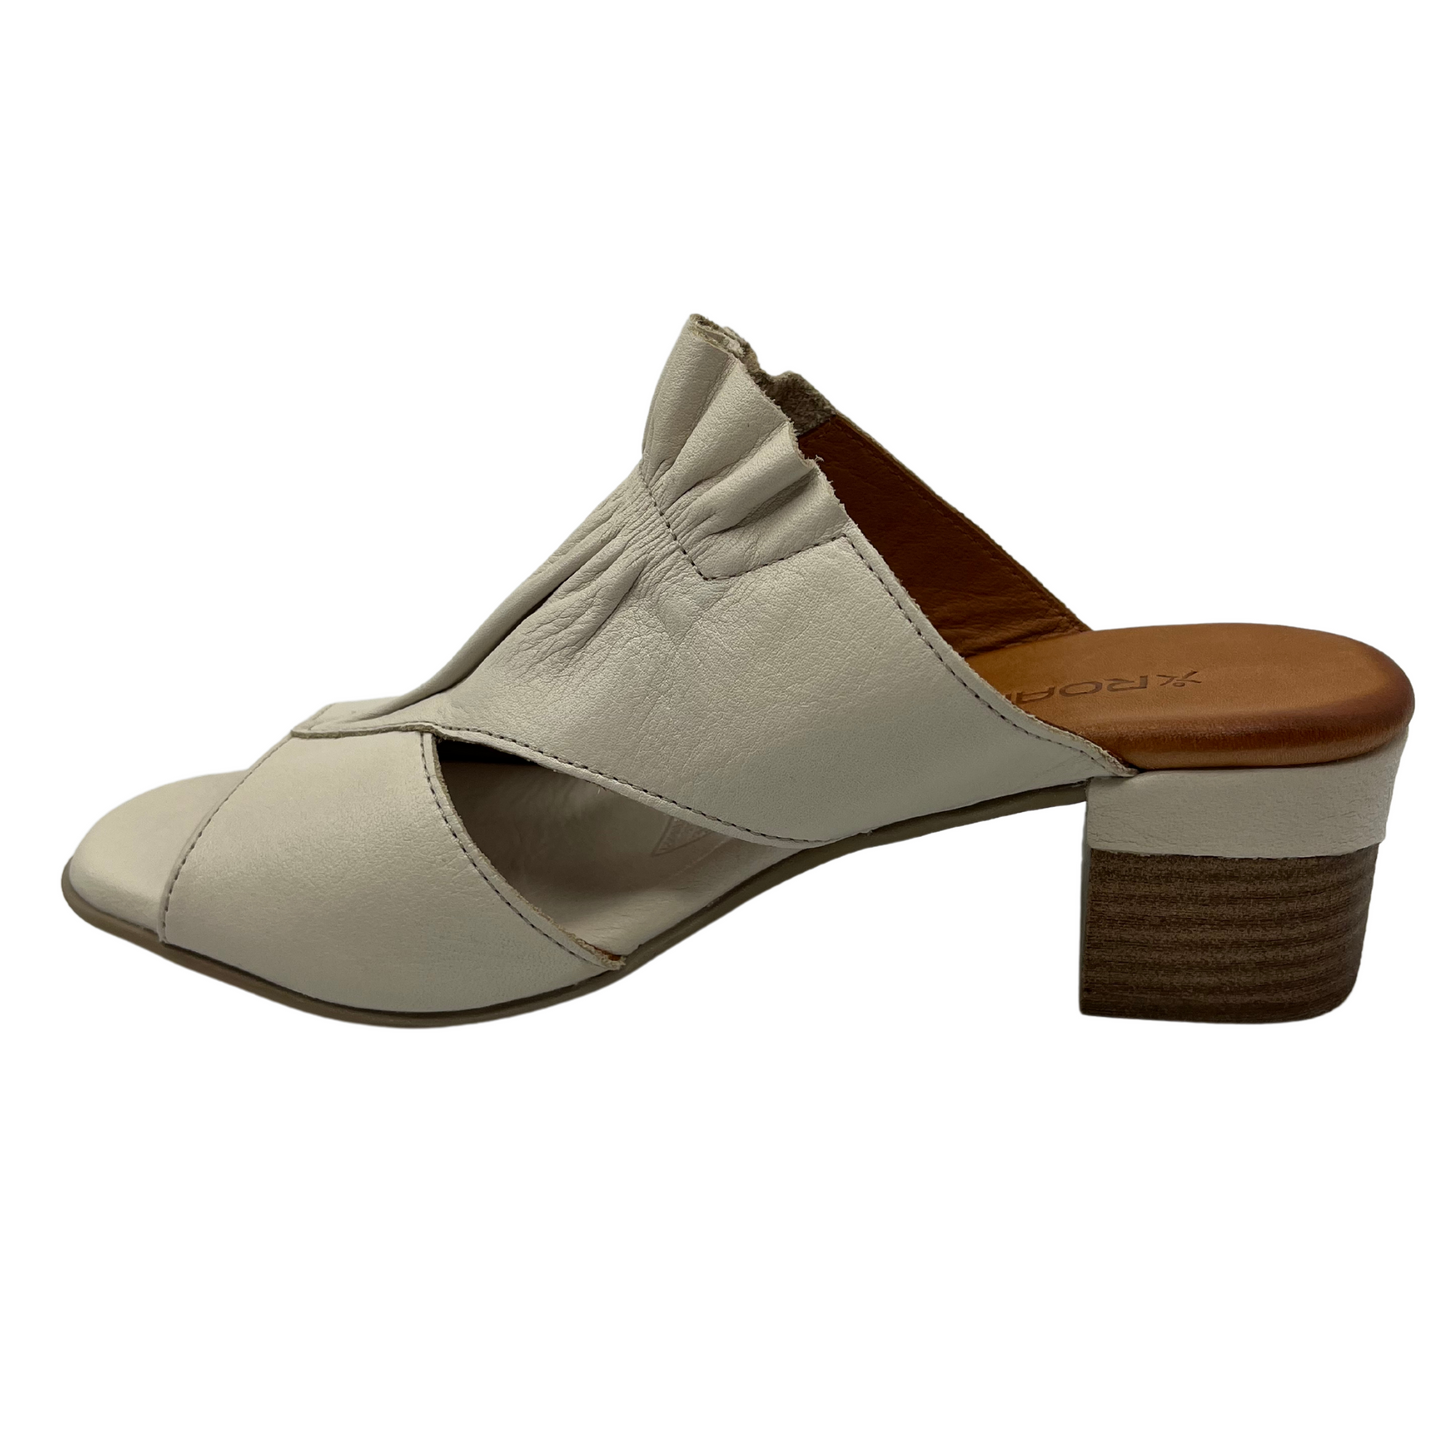 Left facing view of white leather sandal with block heel and peep toe